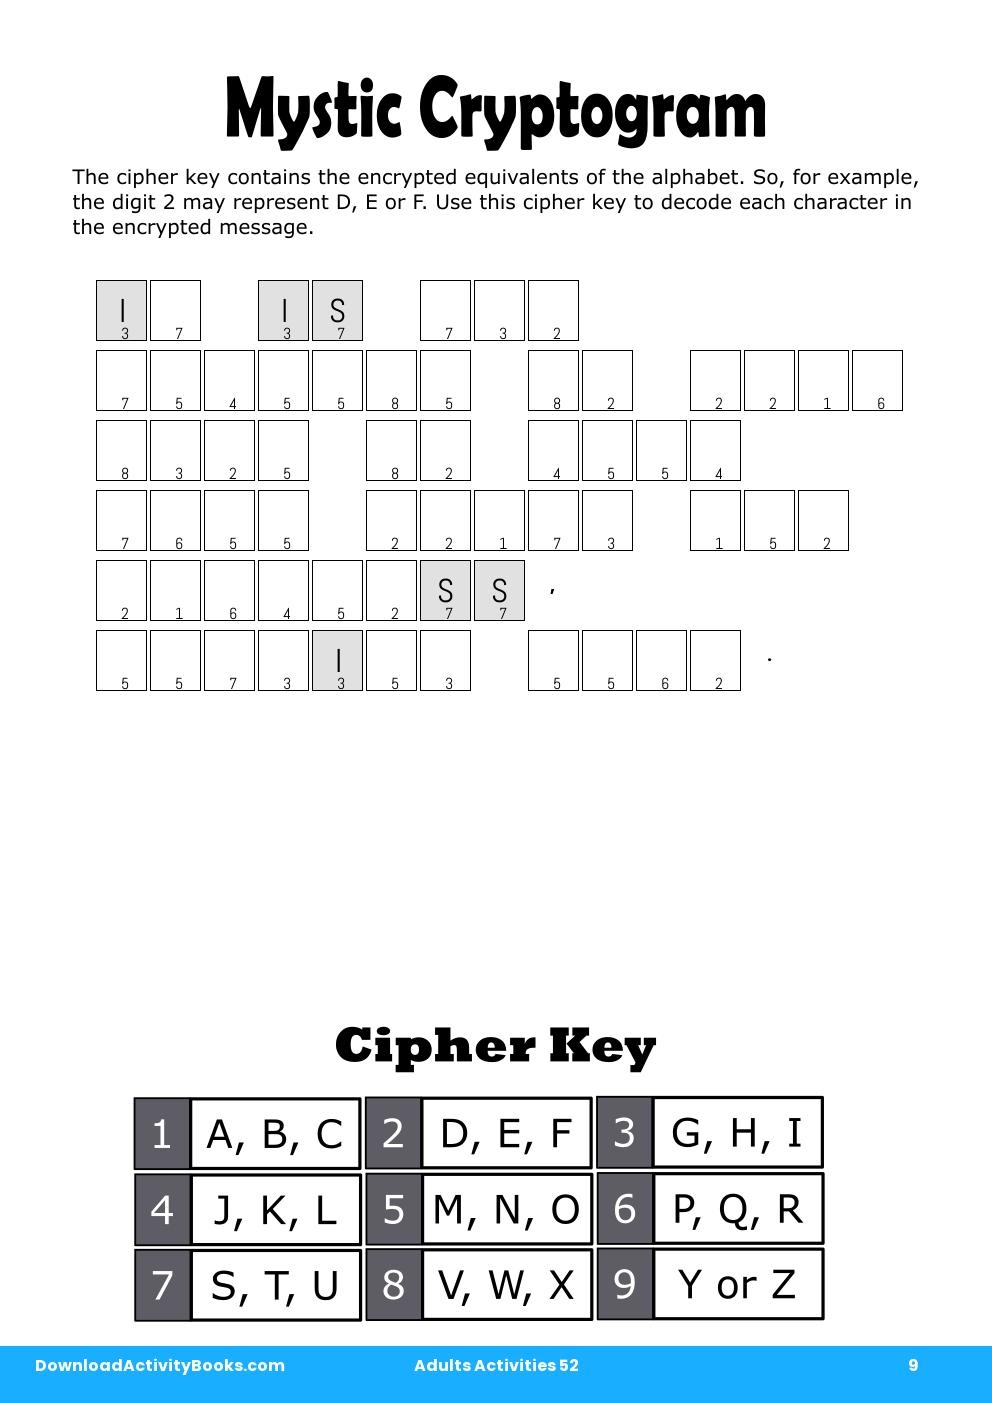 Mystic Cryptogram in Adults Activities 52